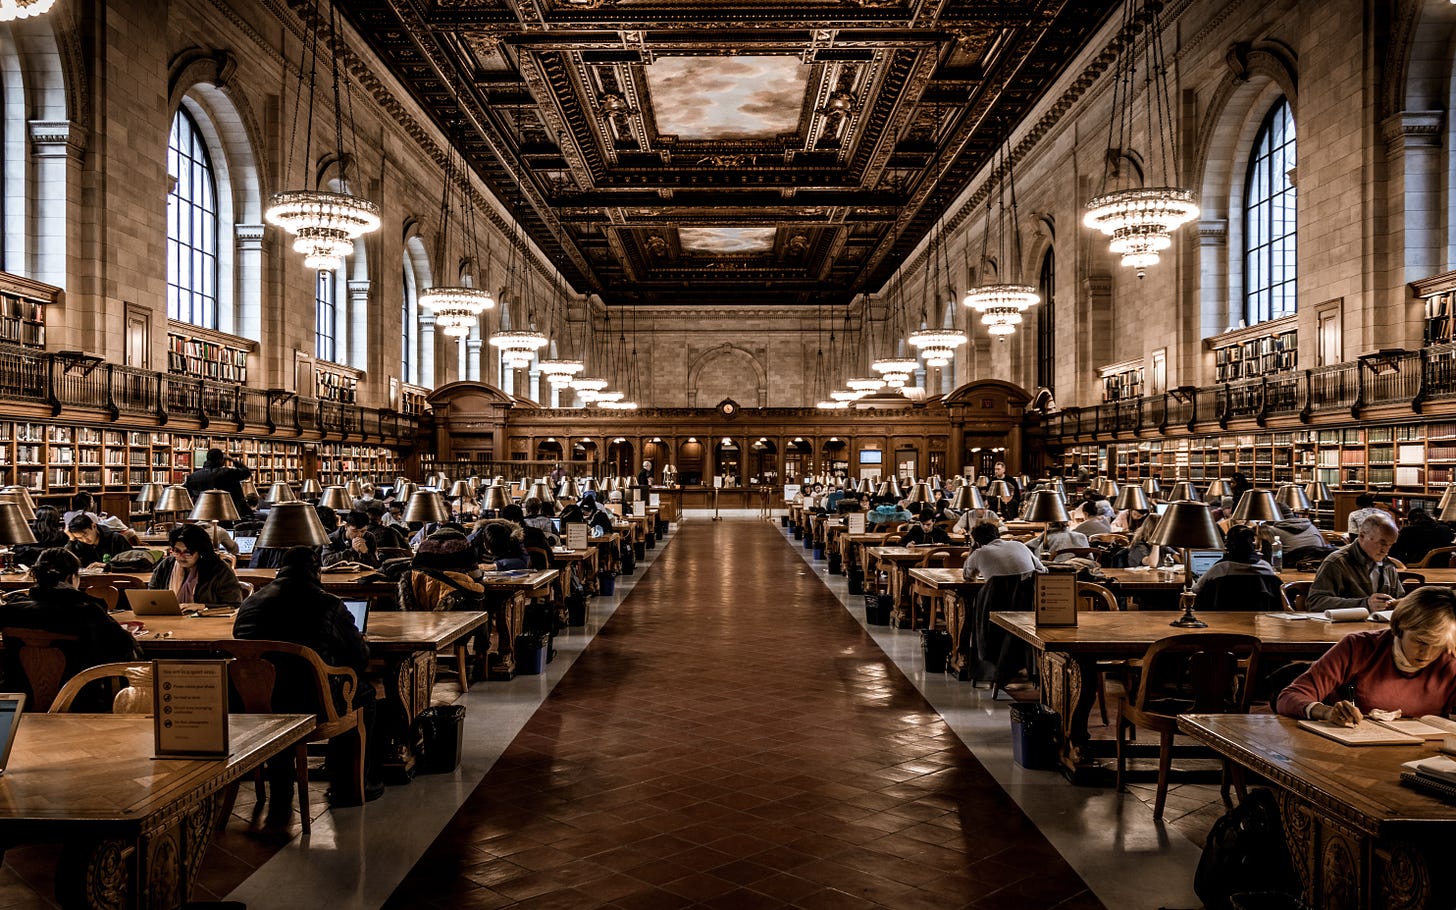 The Rose Main Reading Room at the Stephen A. Schwarzman Building of the New York Public Library, filled with people reading at wooden tables, under chandeliers. 